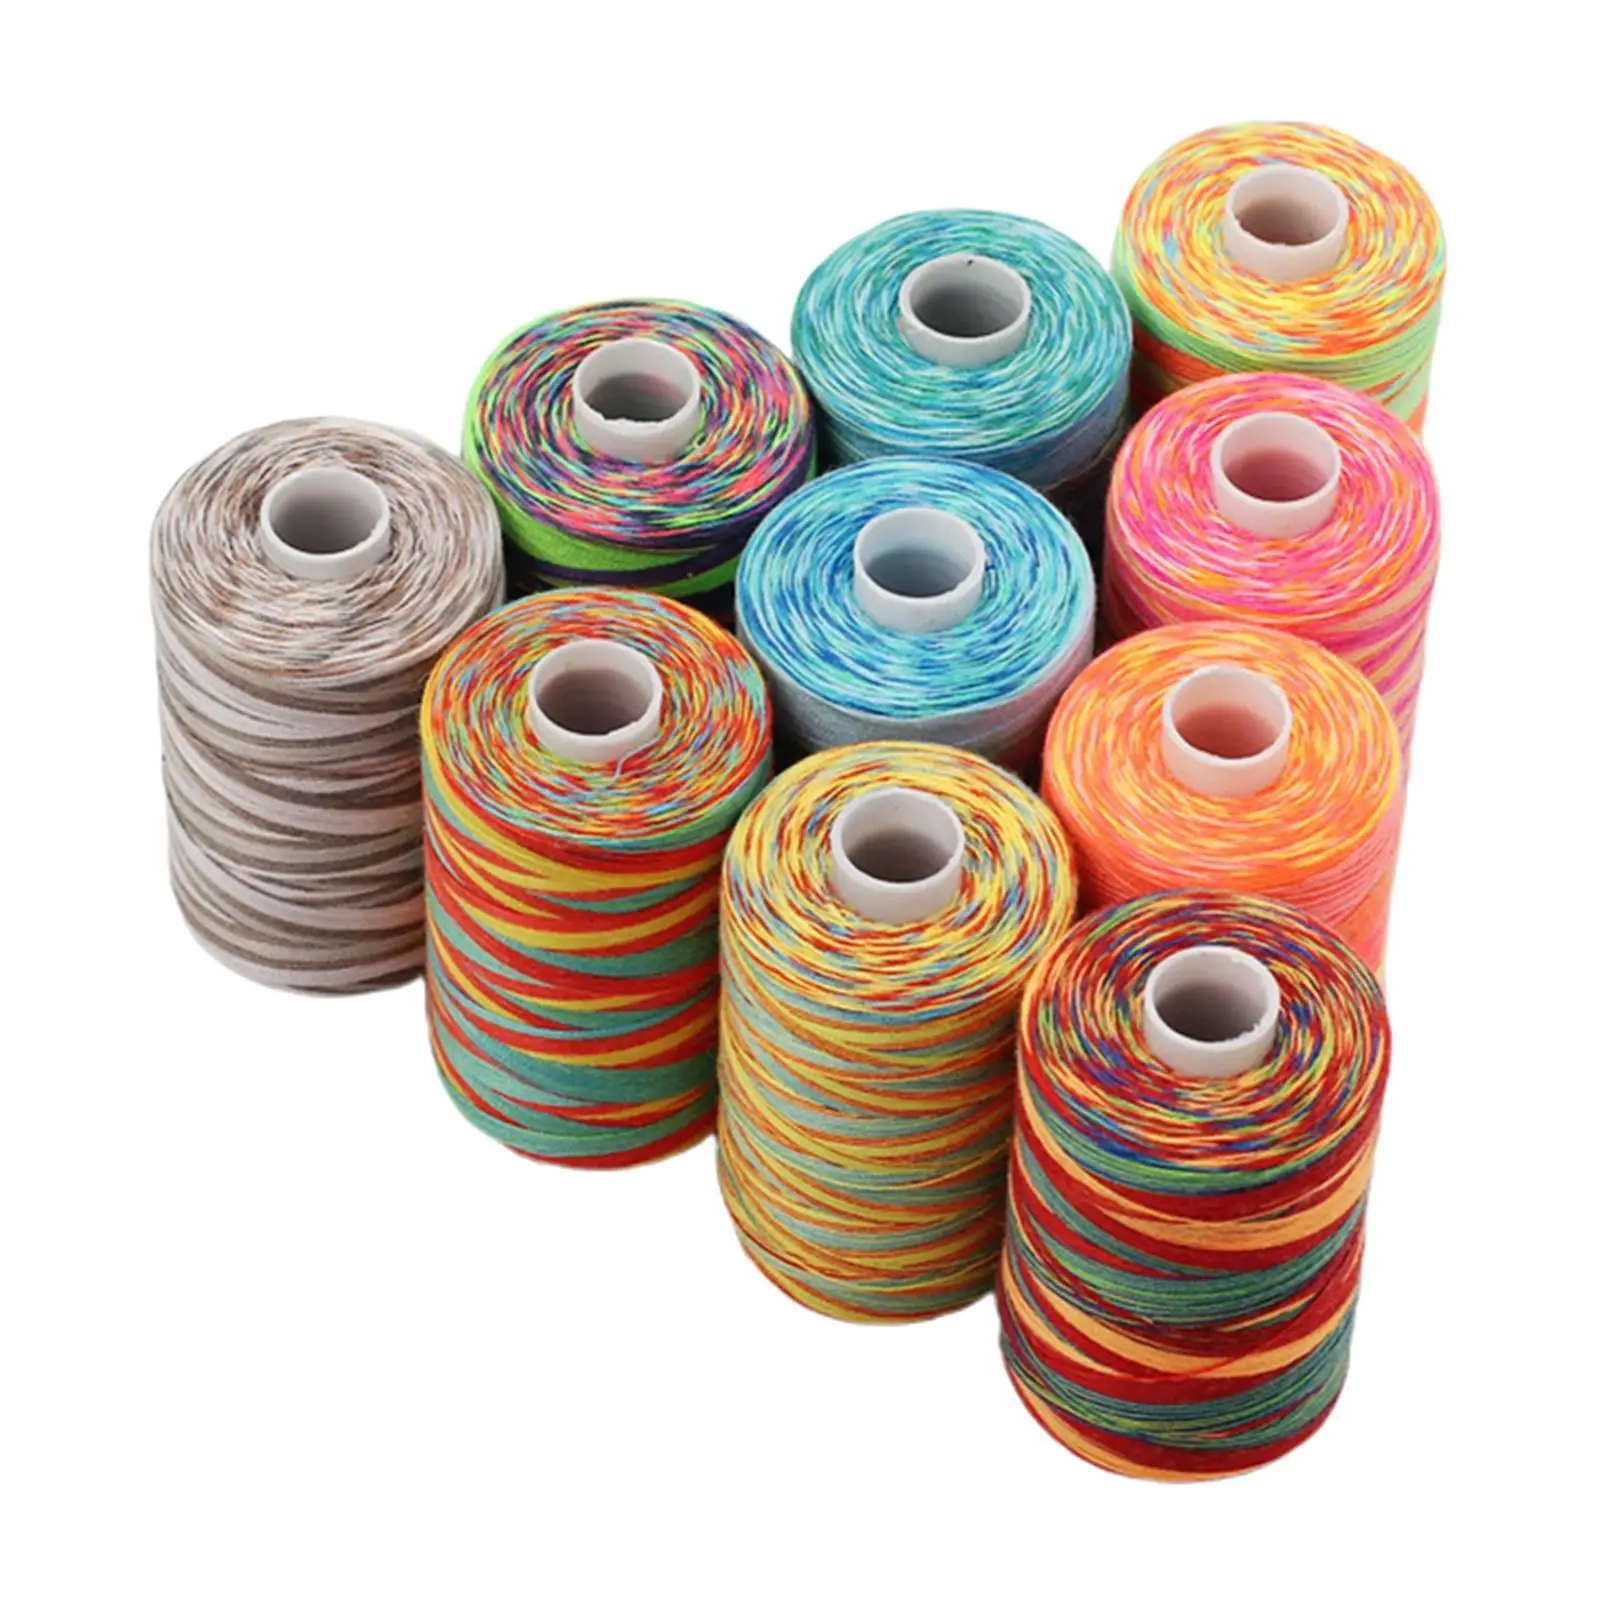 10x High Tenacity Sewing Thread Embroidery Machine Thread Thread Kit Polyester Sewing Thread for Crocheting Quilting Patchwork